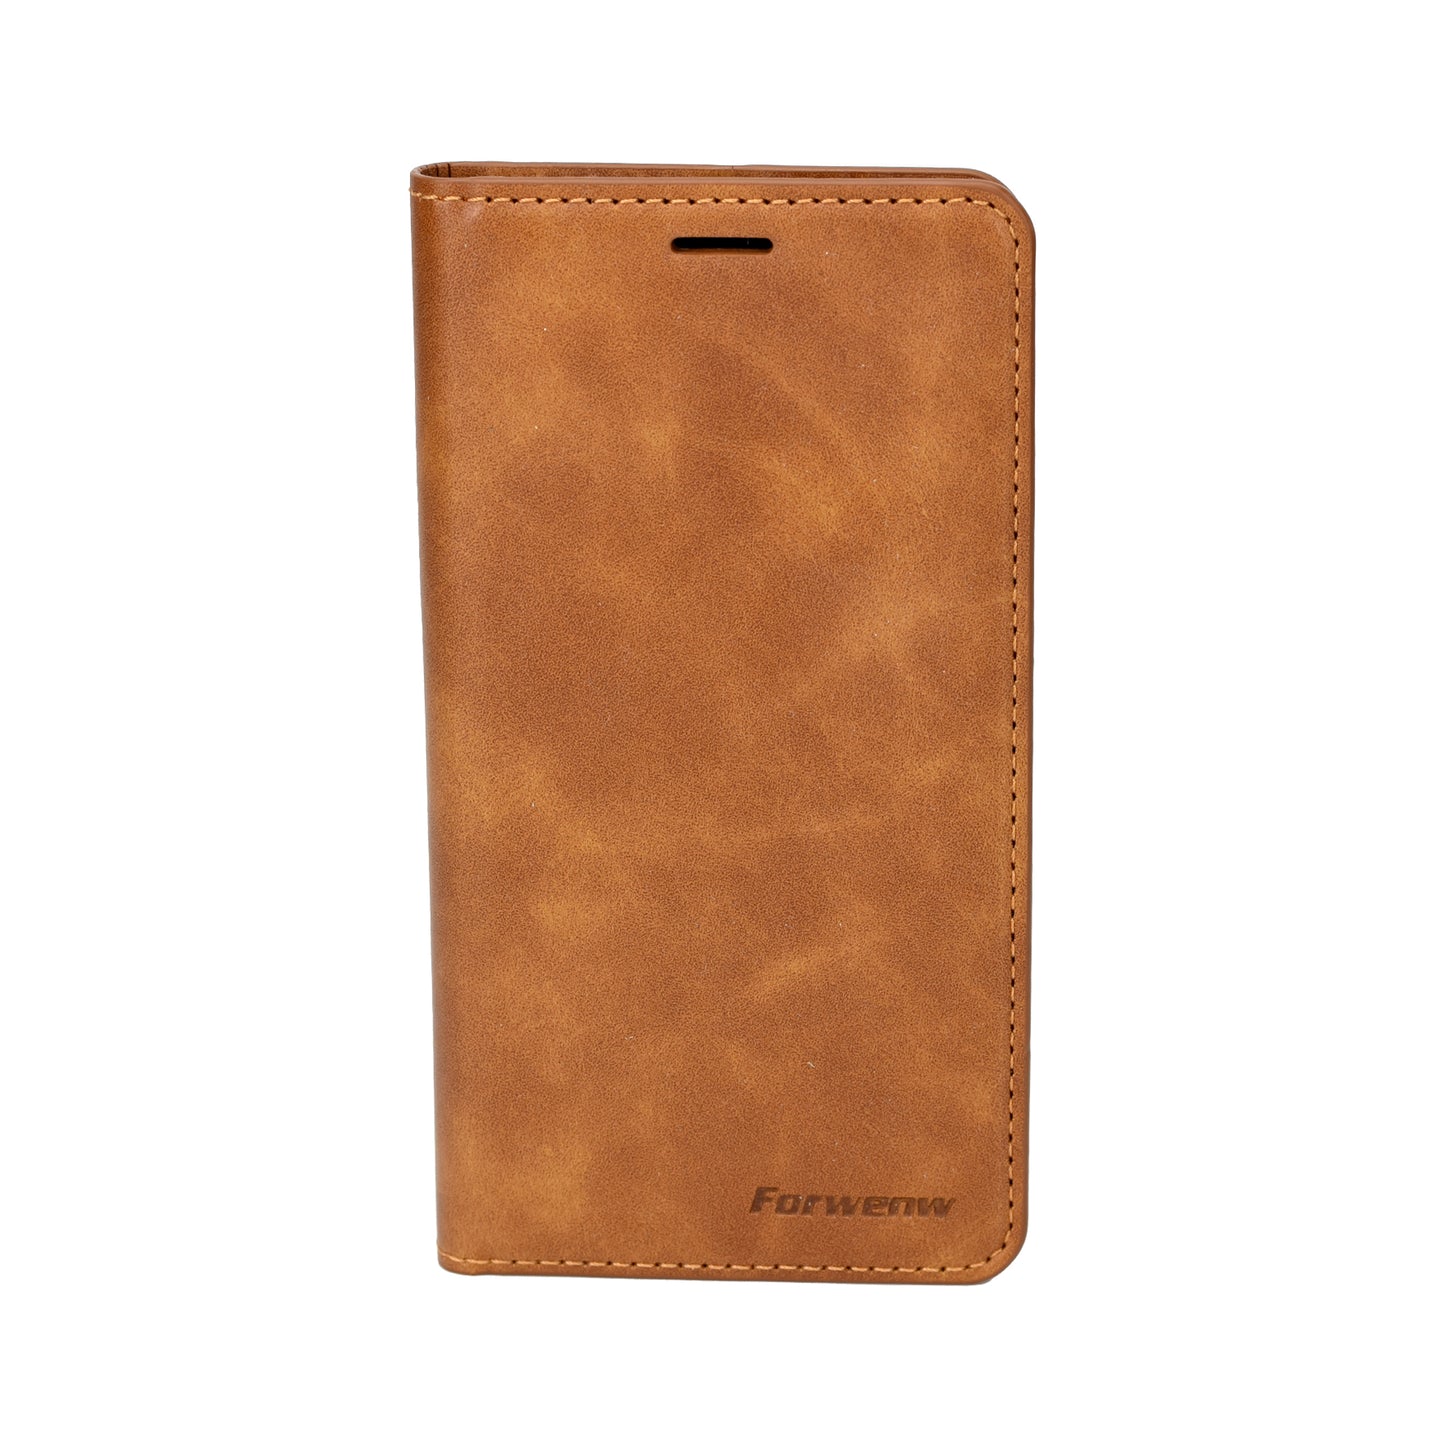 iPhone XR Wallet Cover